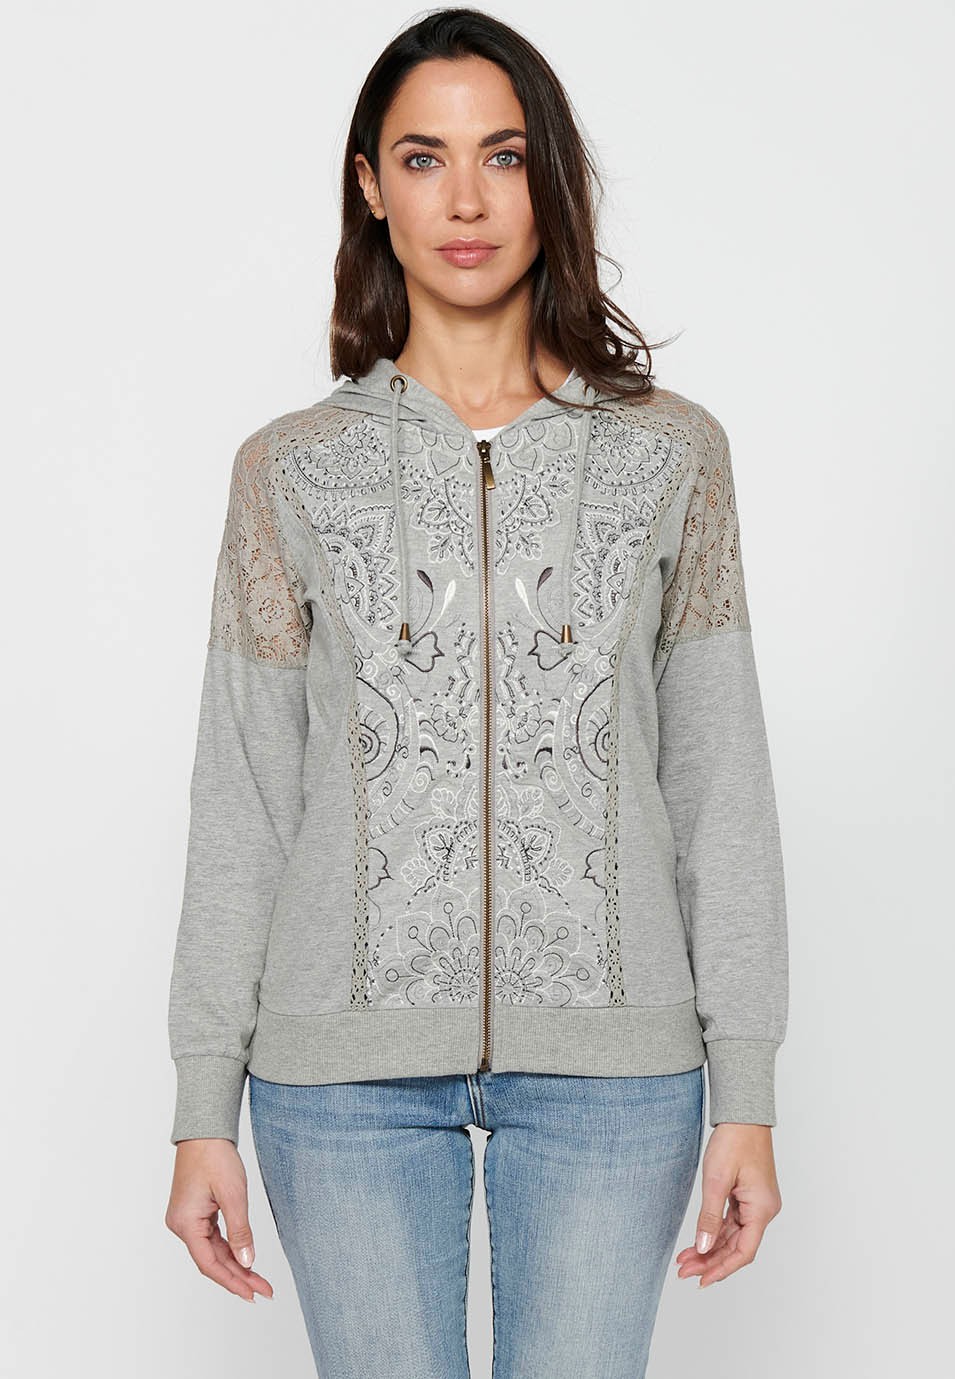 Sweatshirt jacket with zipper front closure and lace details with gray hooded collar for women 4